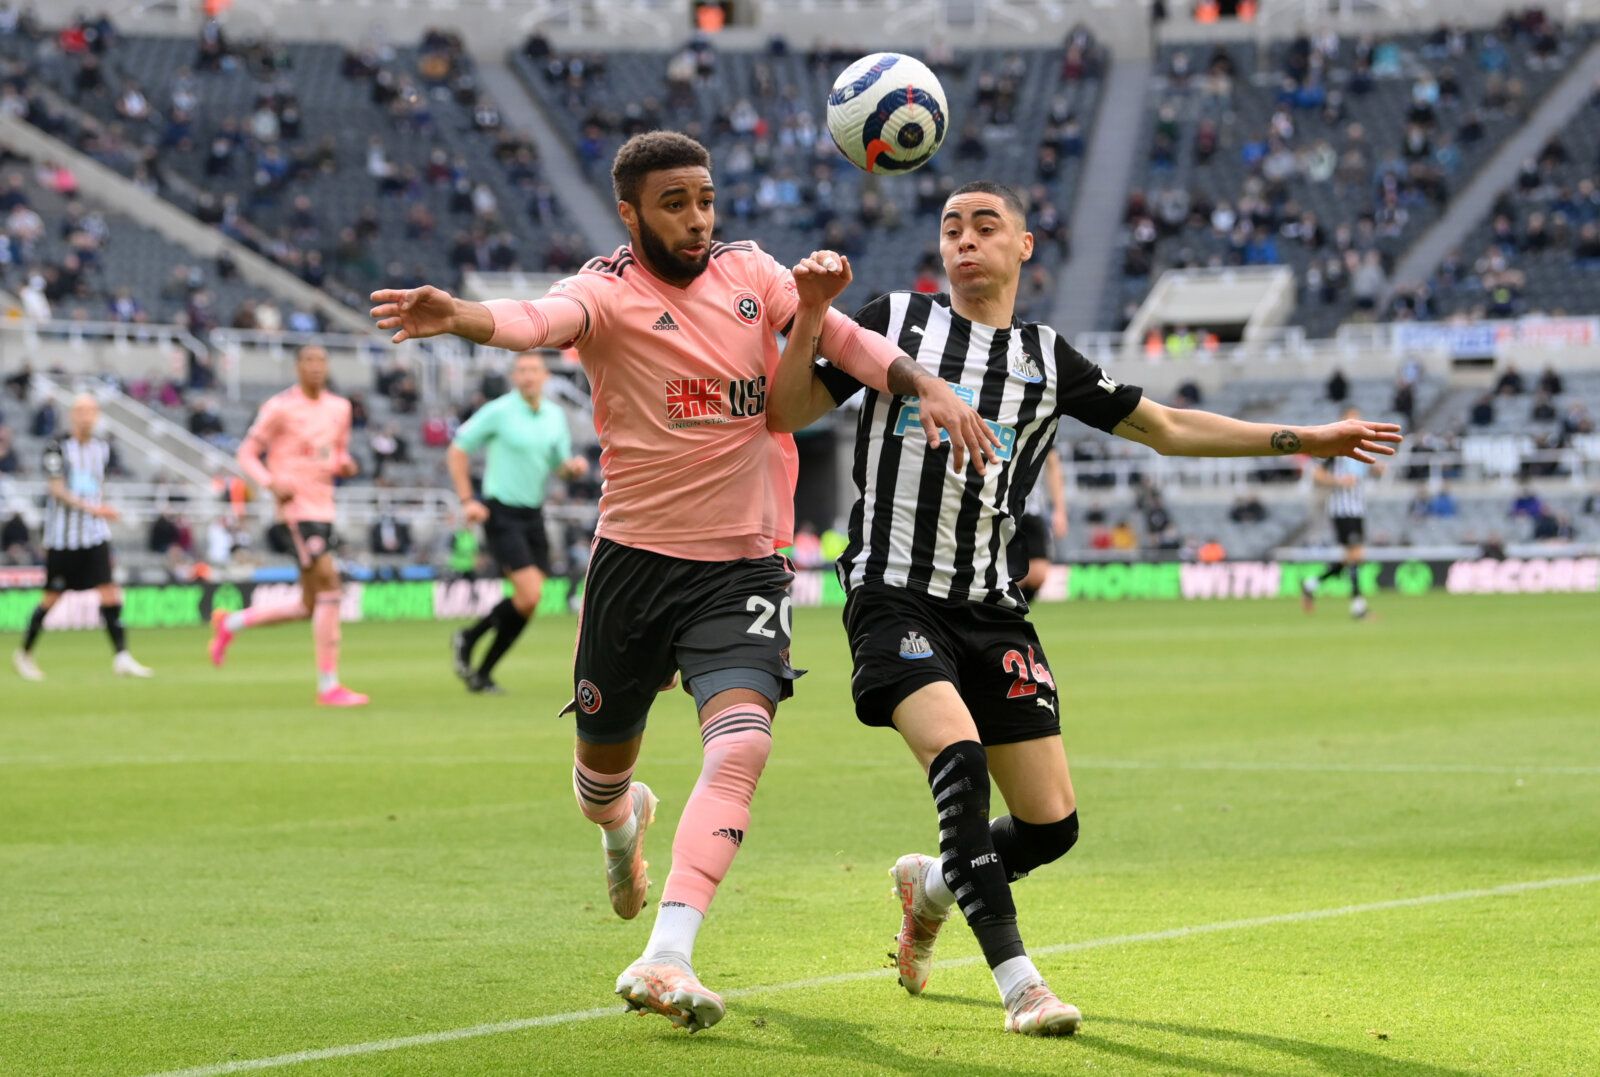 Soccer Football - Premier League - Newcastle United v Sheffield United - St James' Park, Newcastle, Britain - May 19, 2021 Newcastle United's Miguel Almiron in action with Sheffield United's Jayden Bogle Pool via REUTERS/Stu Forster EDITORIAL USE ONLY. No use with unauthorized audio, video, data, fixture lists, club/league logos or 'live' services. Online in-match use limited to 75 images, no video emulation. No use in betting, games or single club /league/player publications.  Please contact yo